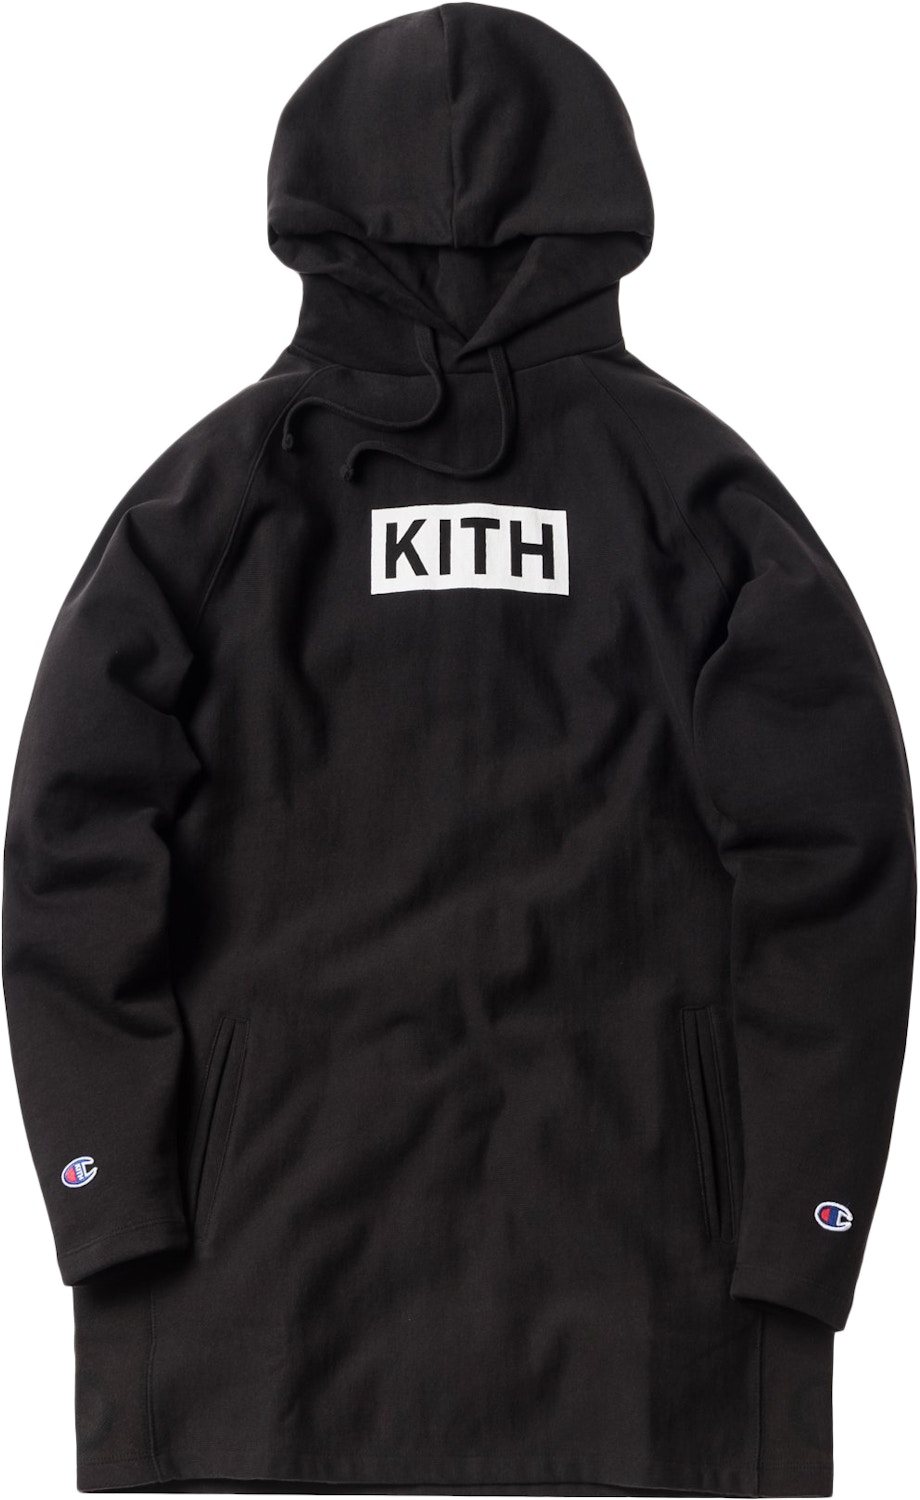 Kith Champion Extended Hoodie Black - SS18